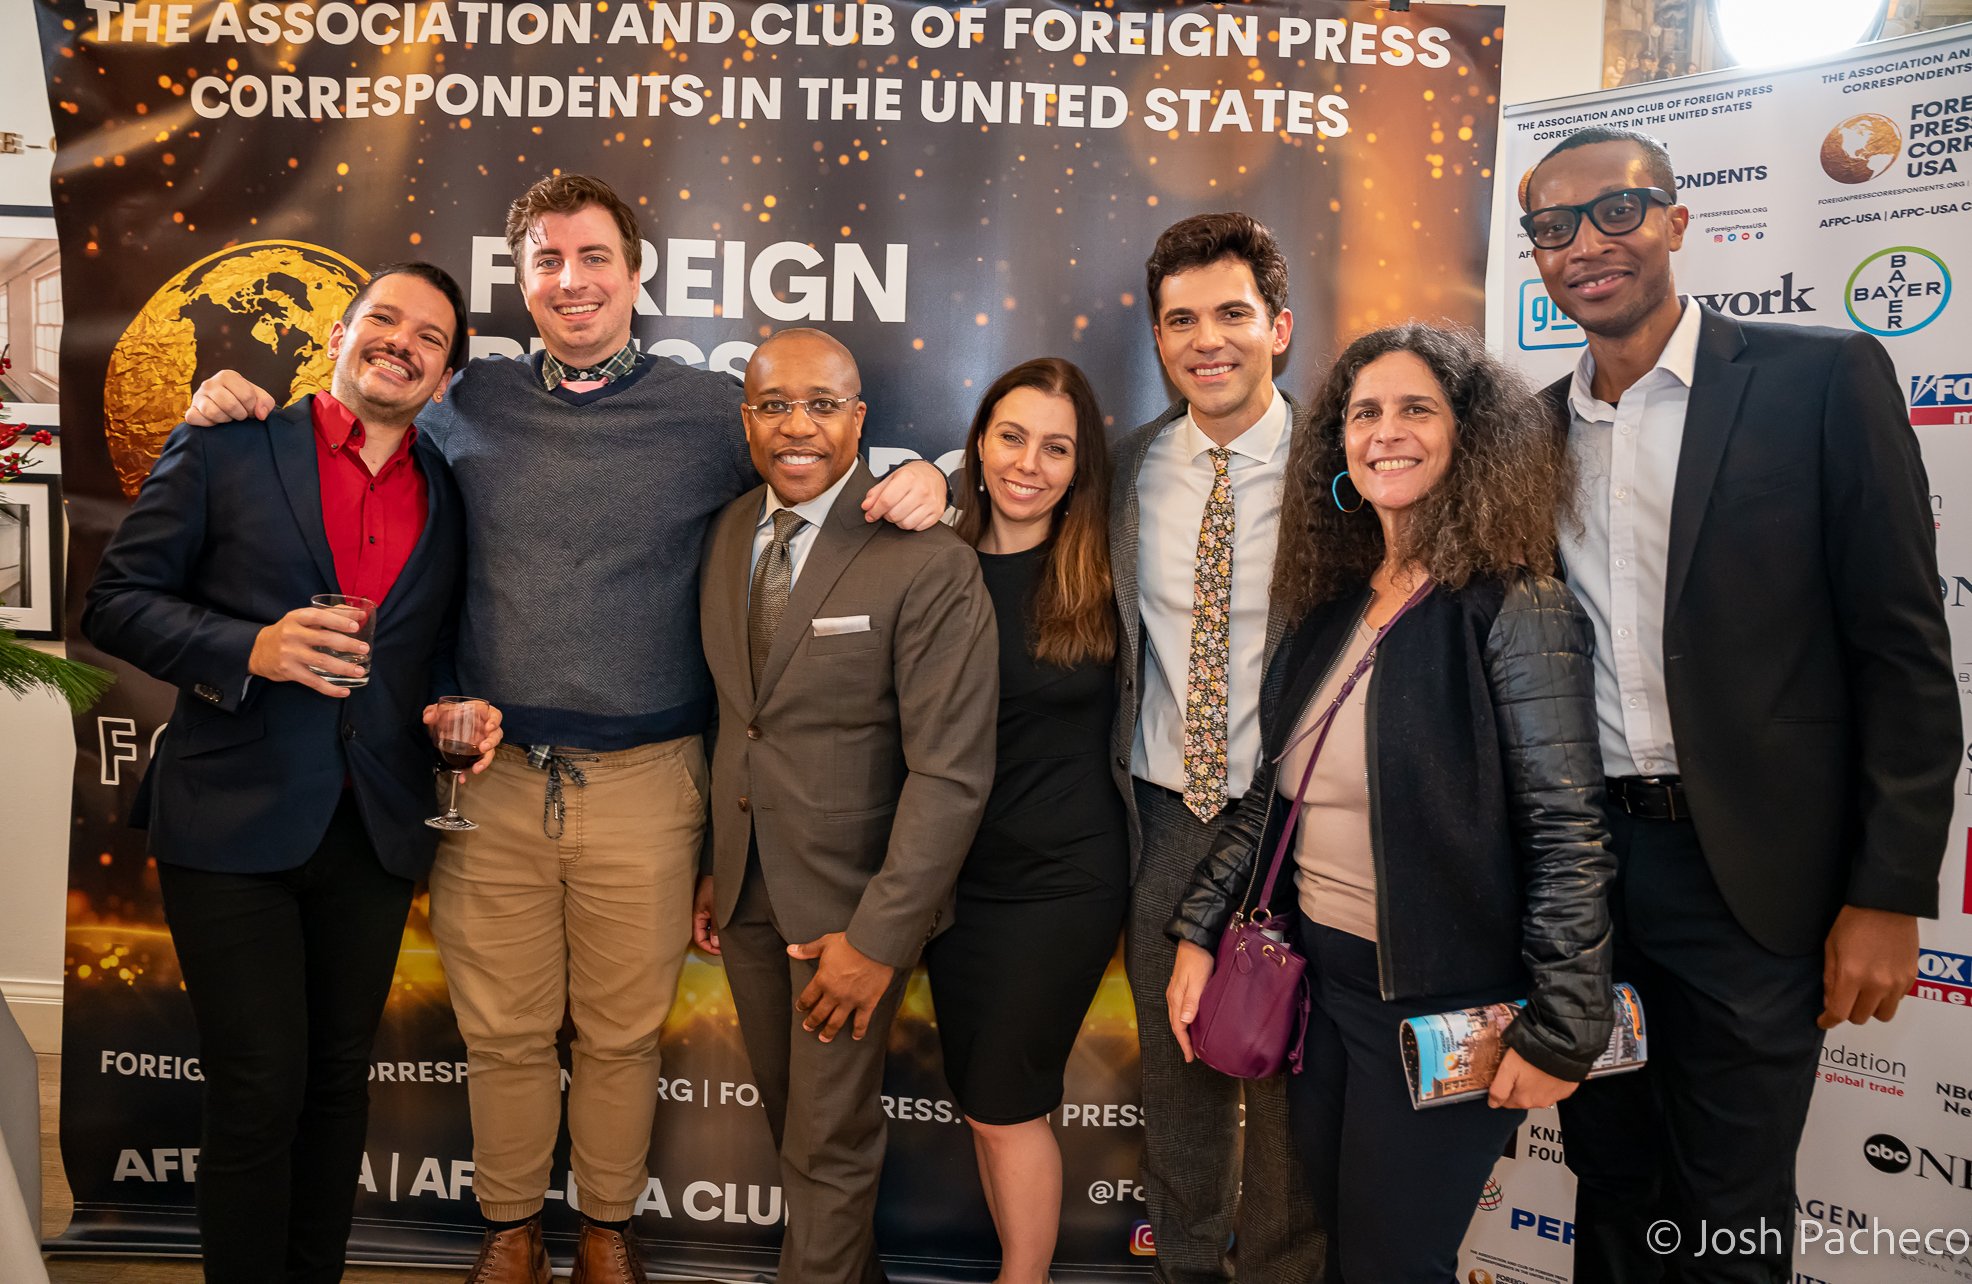 The Association and Club of Foreign Press Correspondents USA